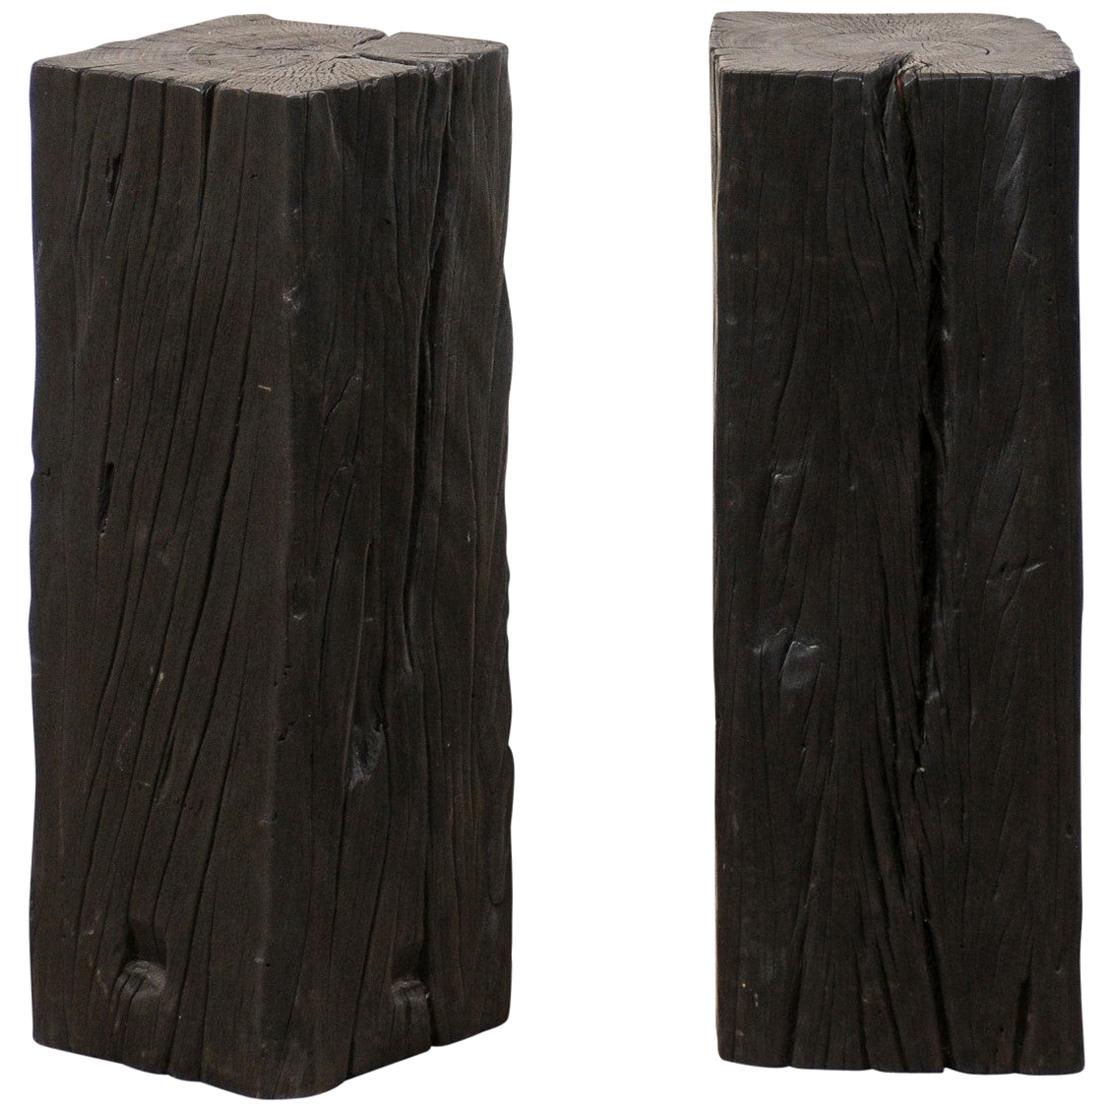 Pair of Tall Carbonized Wood Square Shaped Pedestals, Rich Black Color